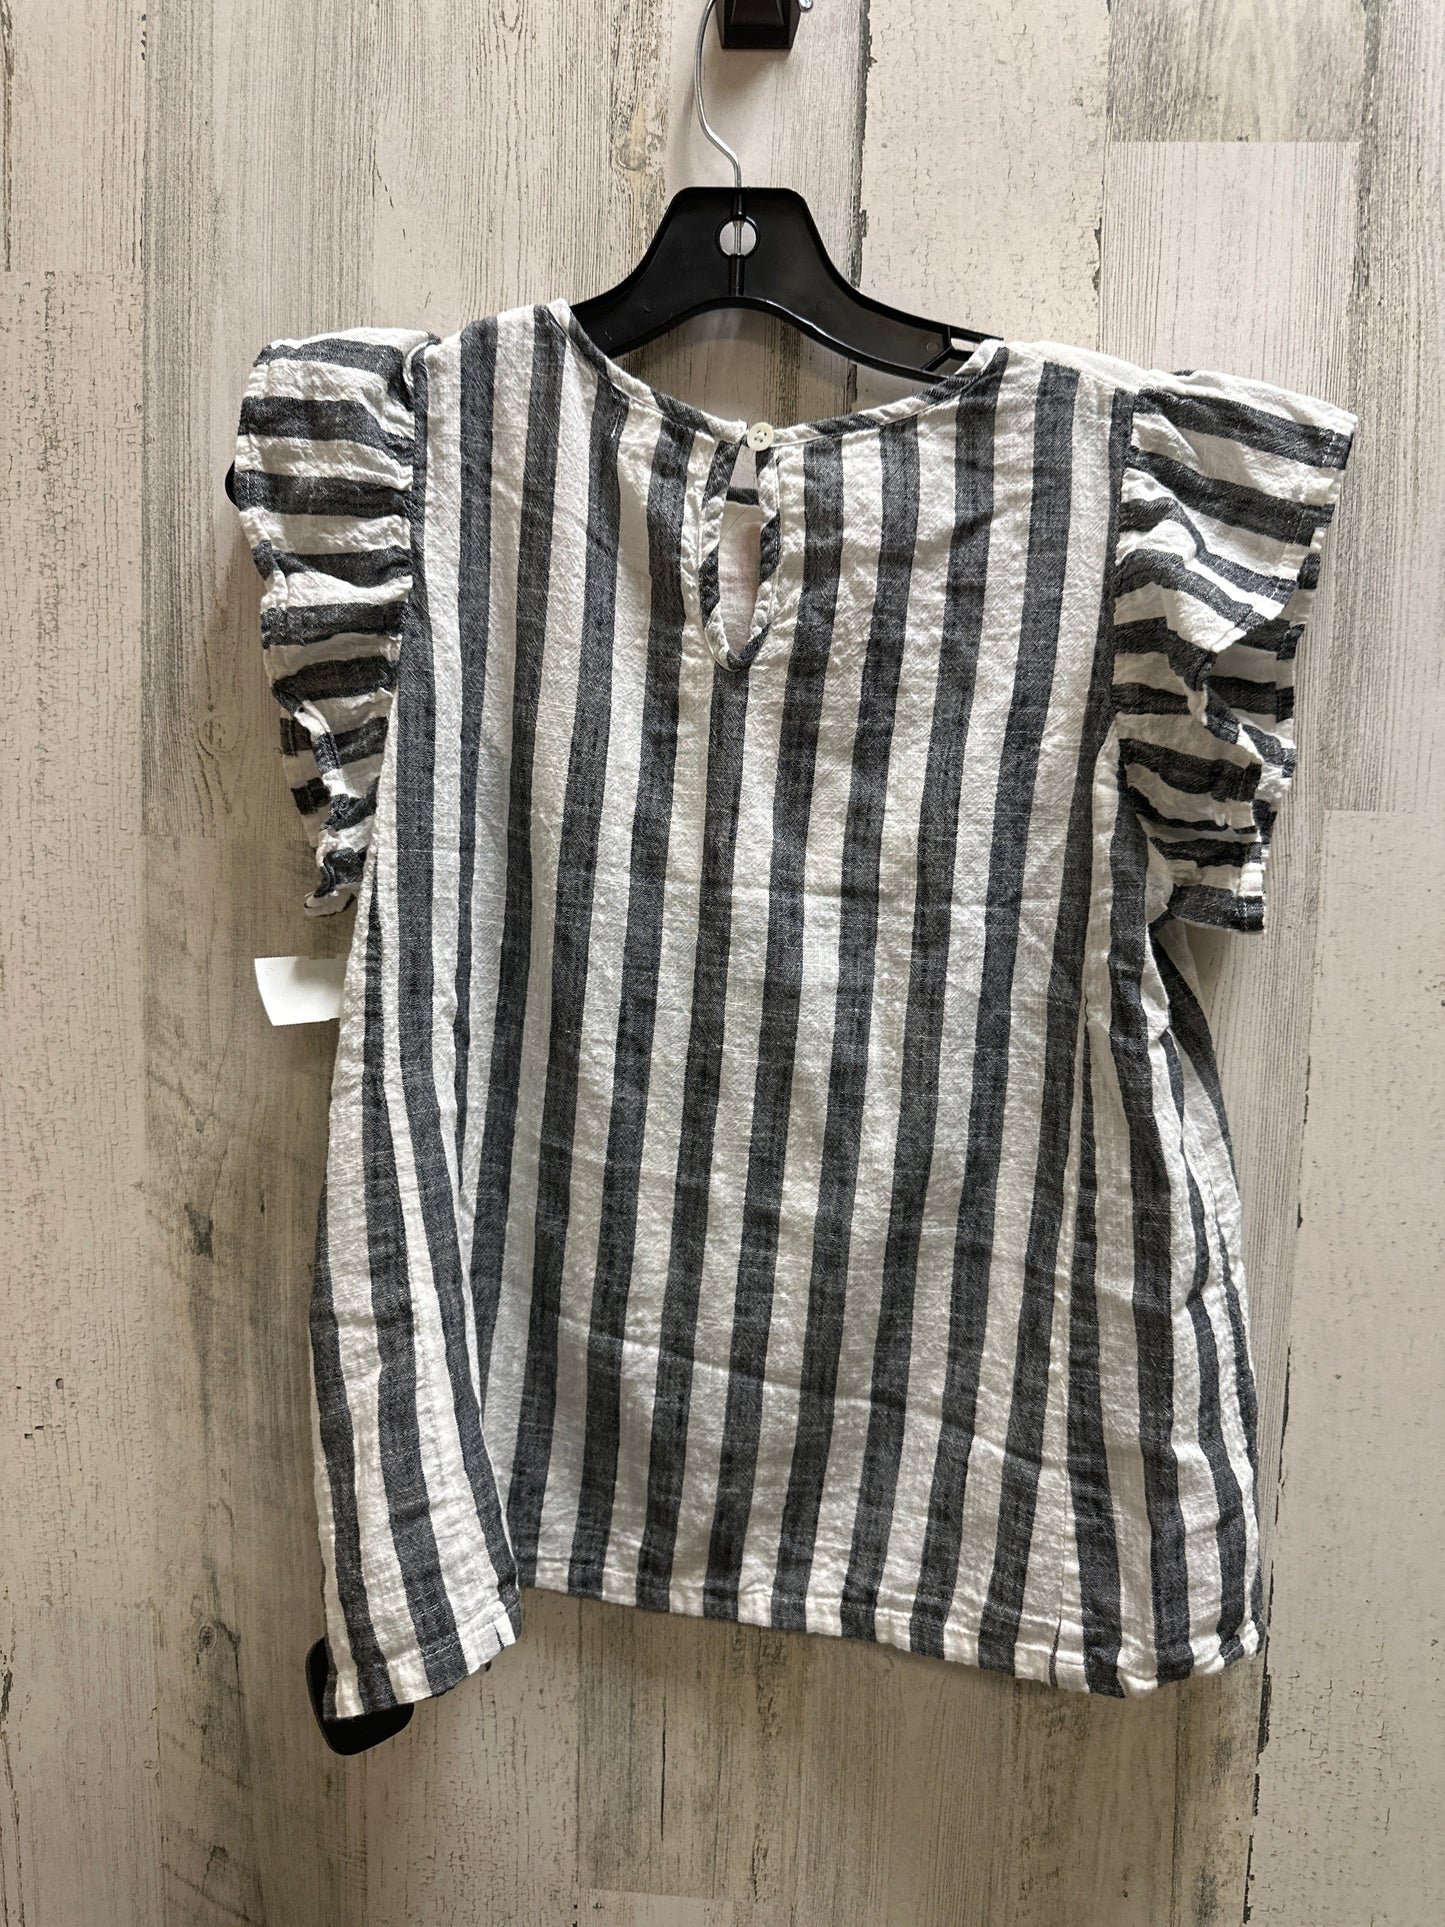 Striped Pattern Top Short Sleeve Thml, Size Xs